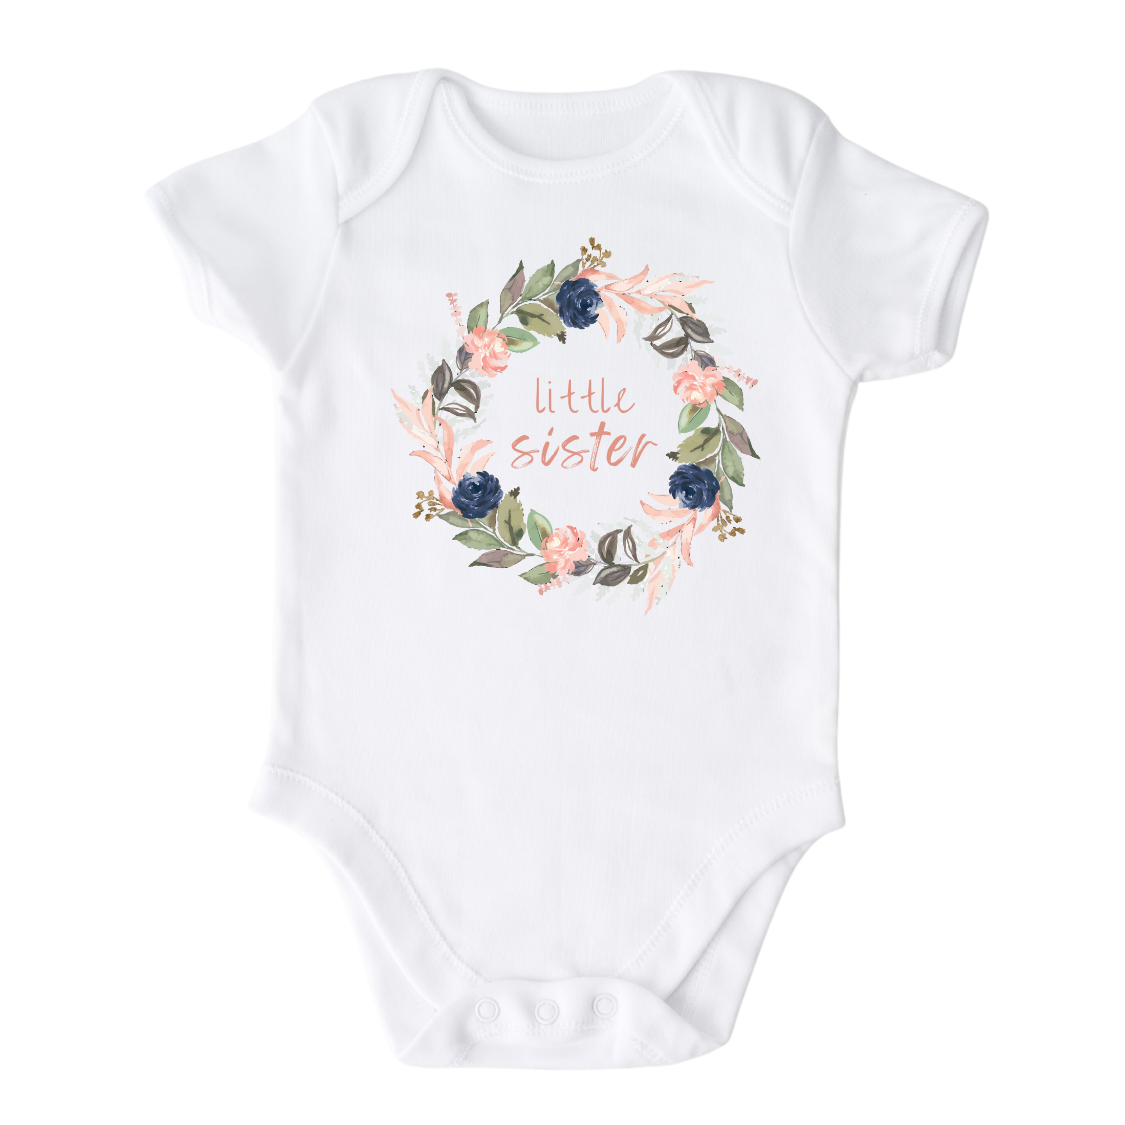 White Baby Bodysuit Onsie with a cute printed graphic of a floral wreath and the text 'Little Sister.' This adorable t-shirt celebrates the arrival of a precious little sister.